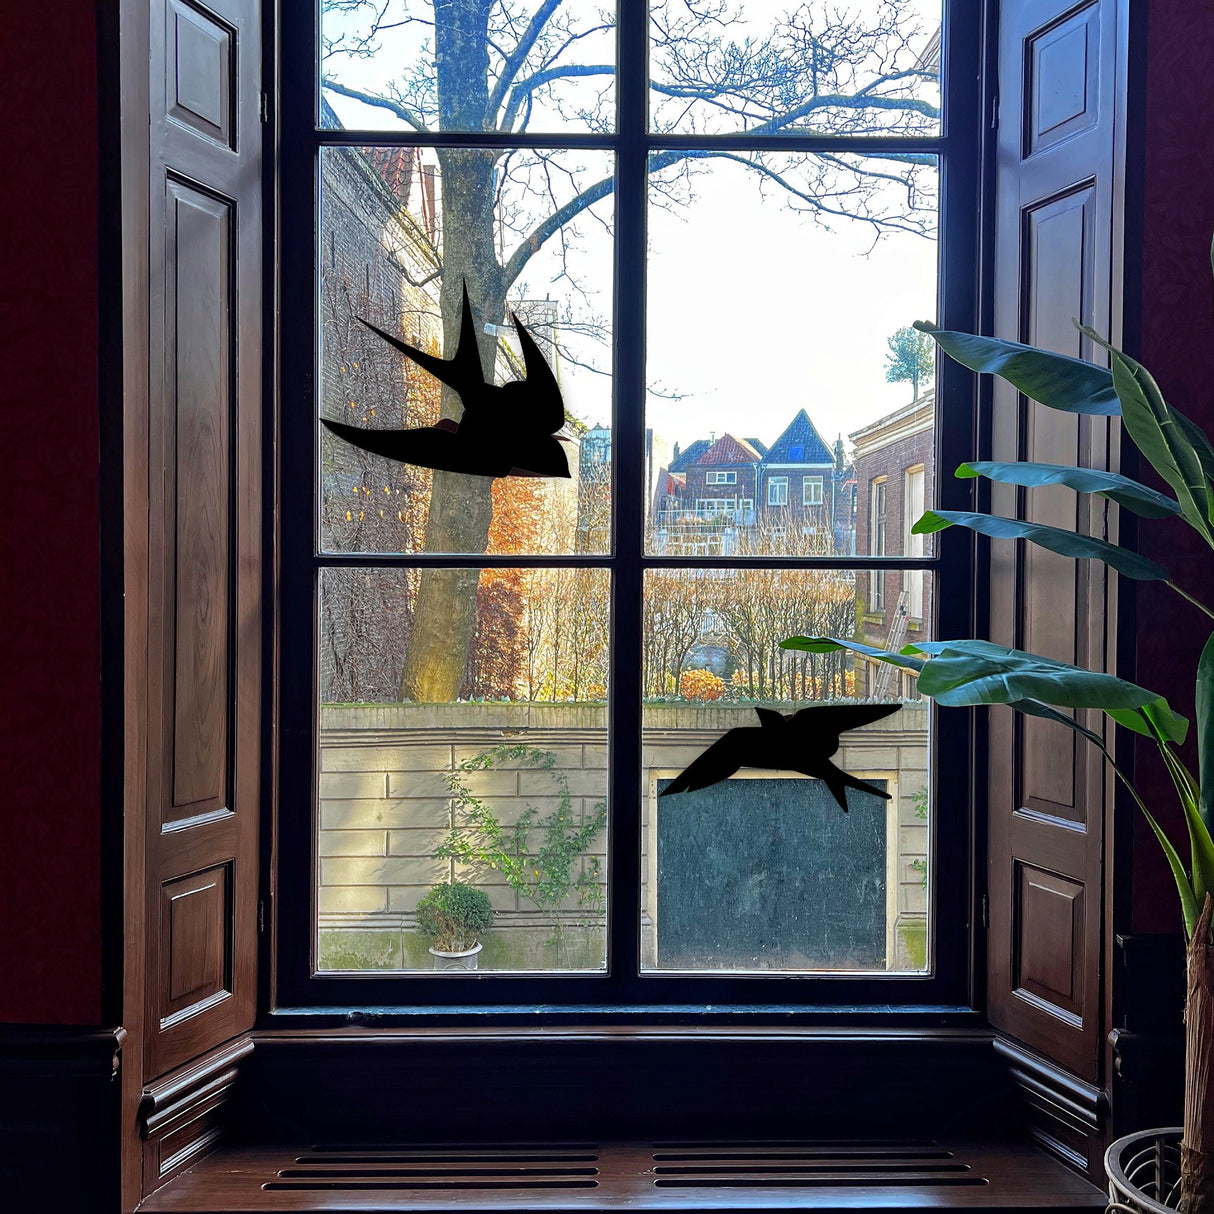 50% OFF - 25-Pack Black Bird Deterrent Window Decals - Anti-Collision Cling Stickers - Safety Glass Protector Prevents Bird Strikes 8" size